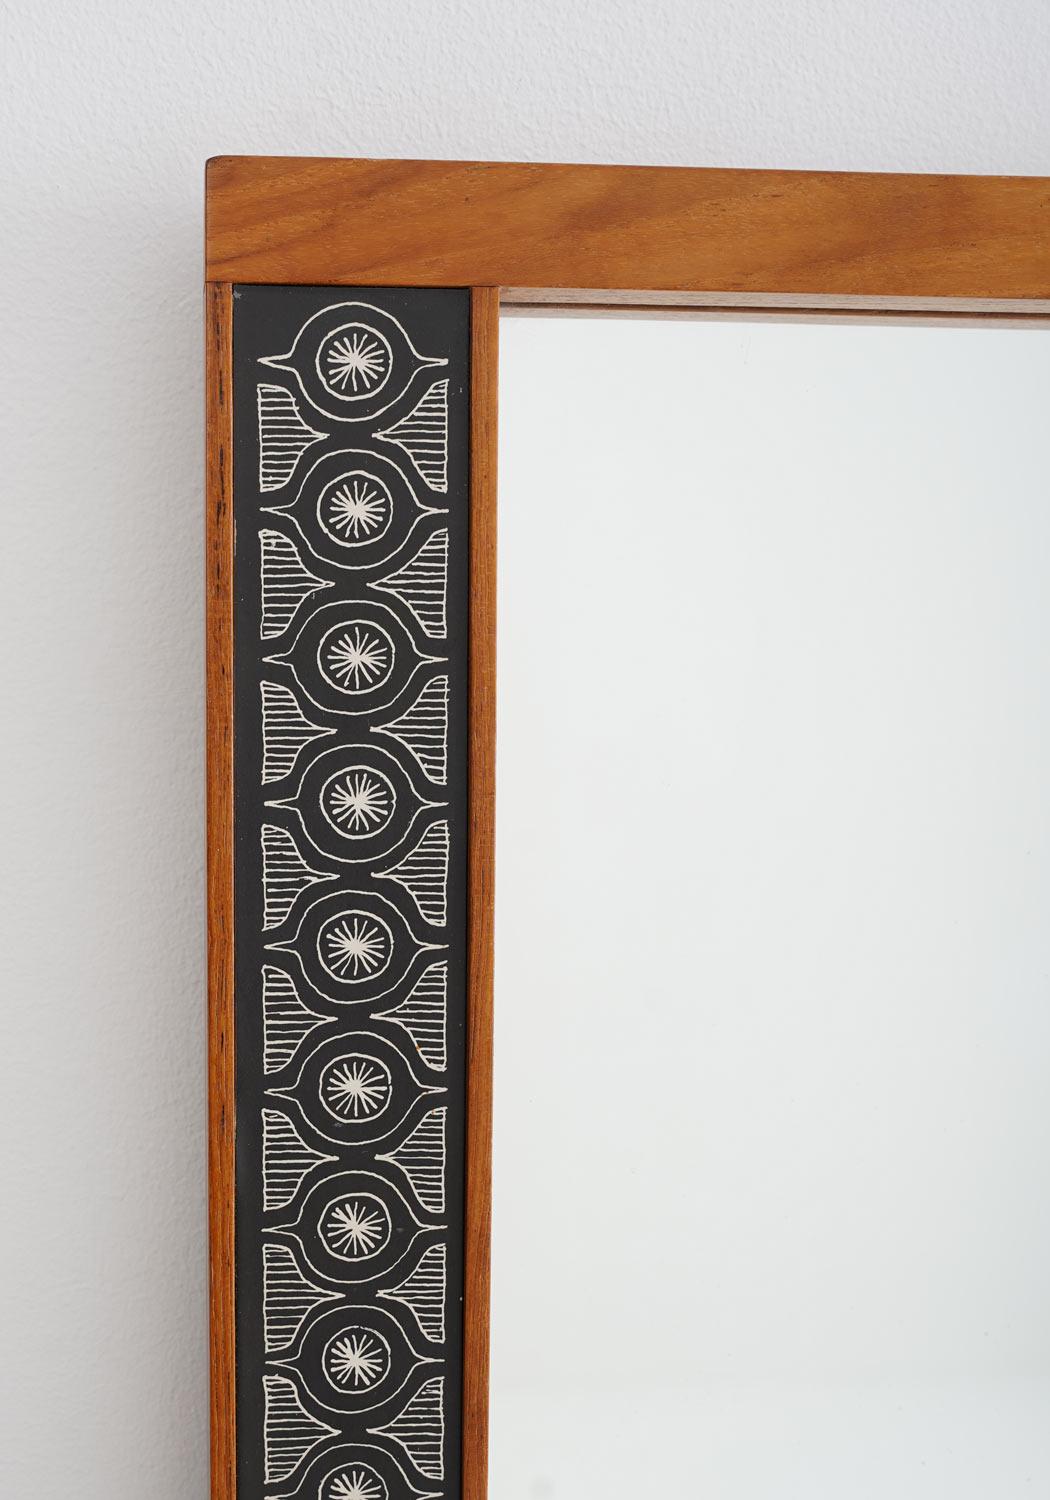 Swedish Hallway Shelf and Mirror in Teak by Hans-Agne Jakobsson In Good Condition For Sale In Karlstad, SE